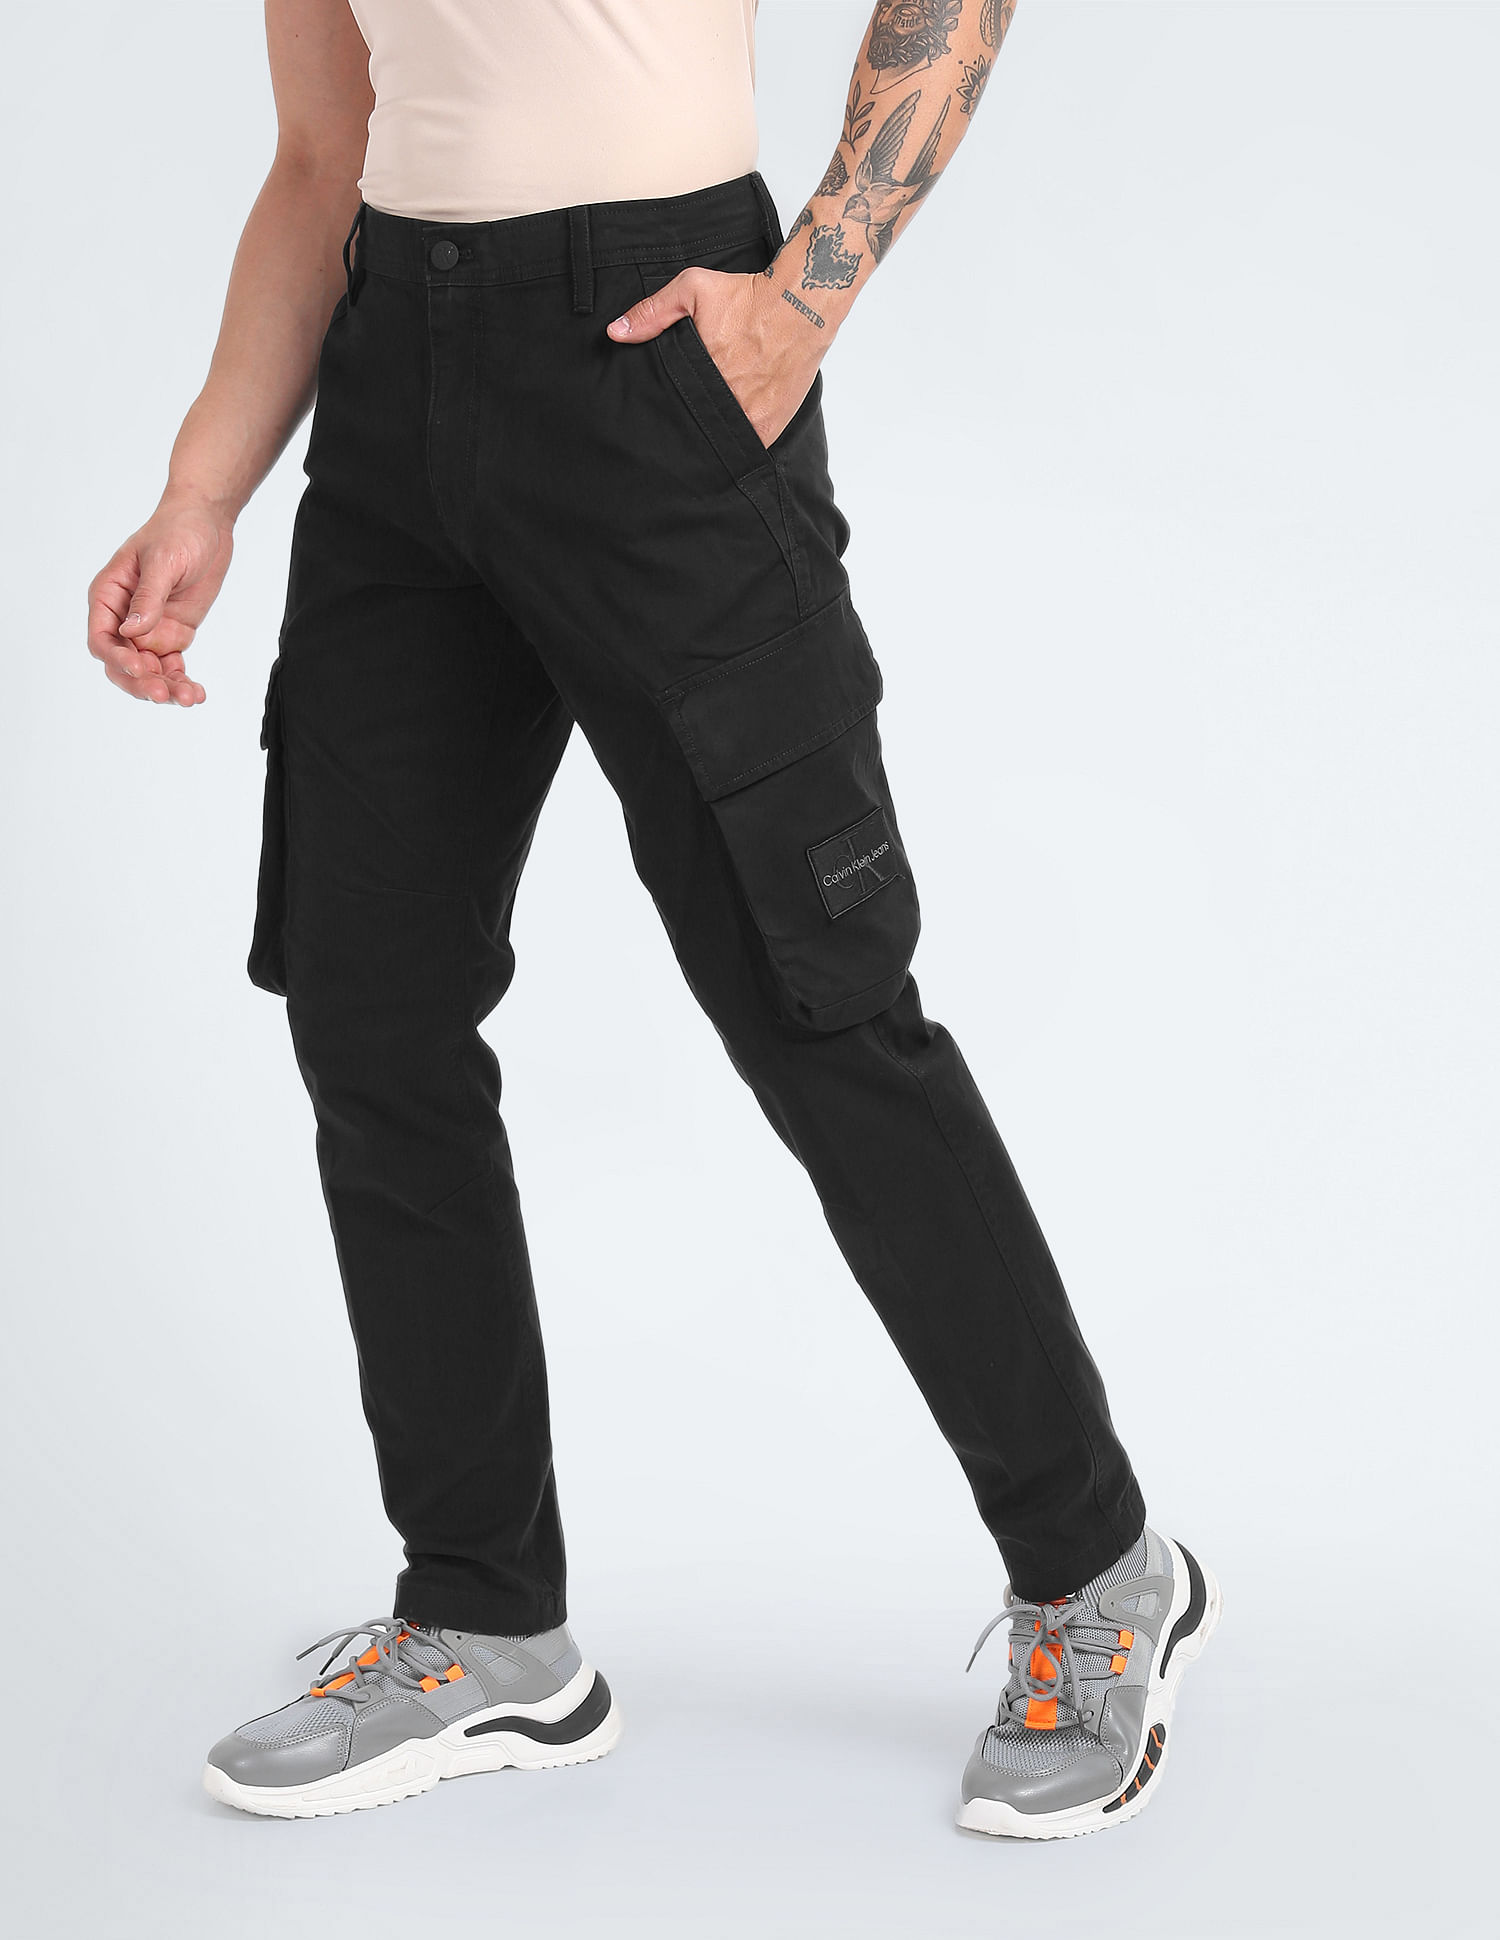 23 Best Cargo Pants for Men in 2023: Cool, Convenient Trousers From Todd  Snyder, Nike, Gucci, and More | GQ